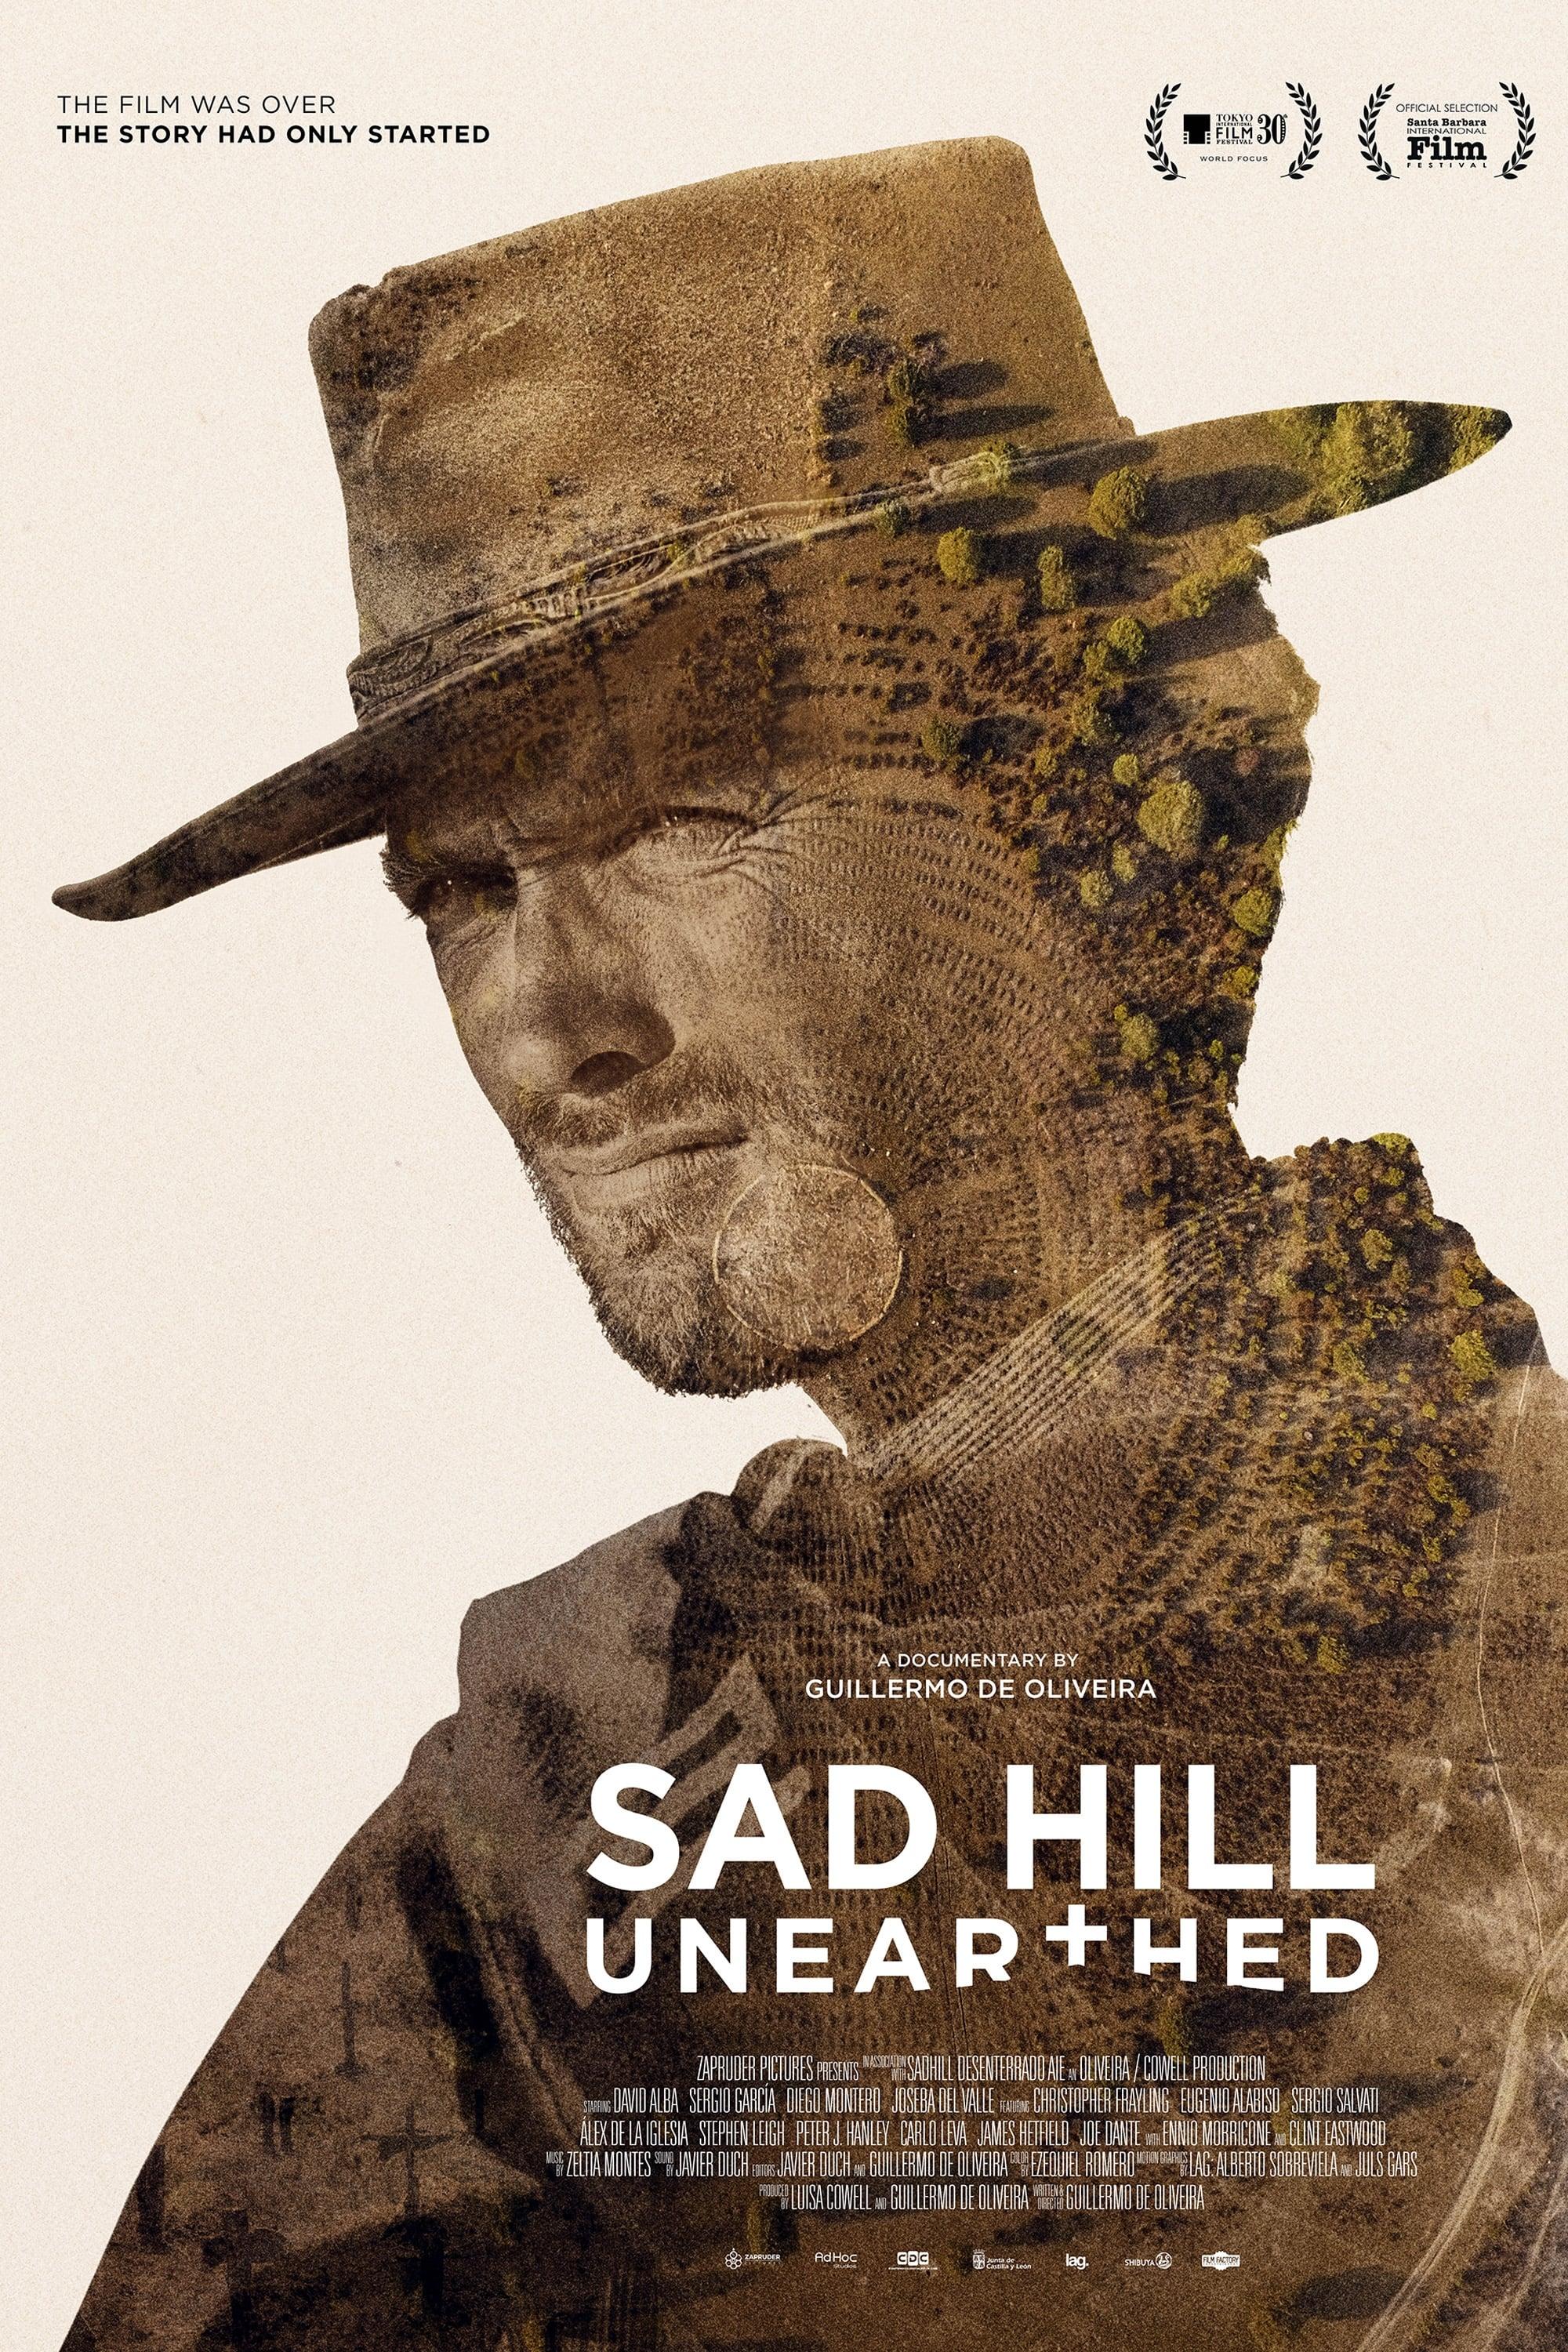 Sad Hill Unearthed poster